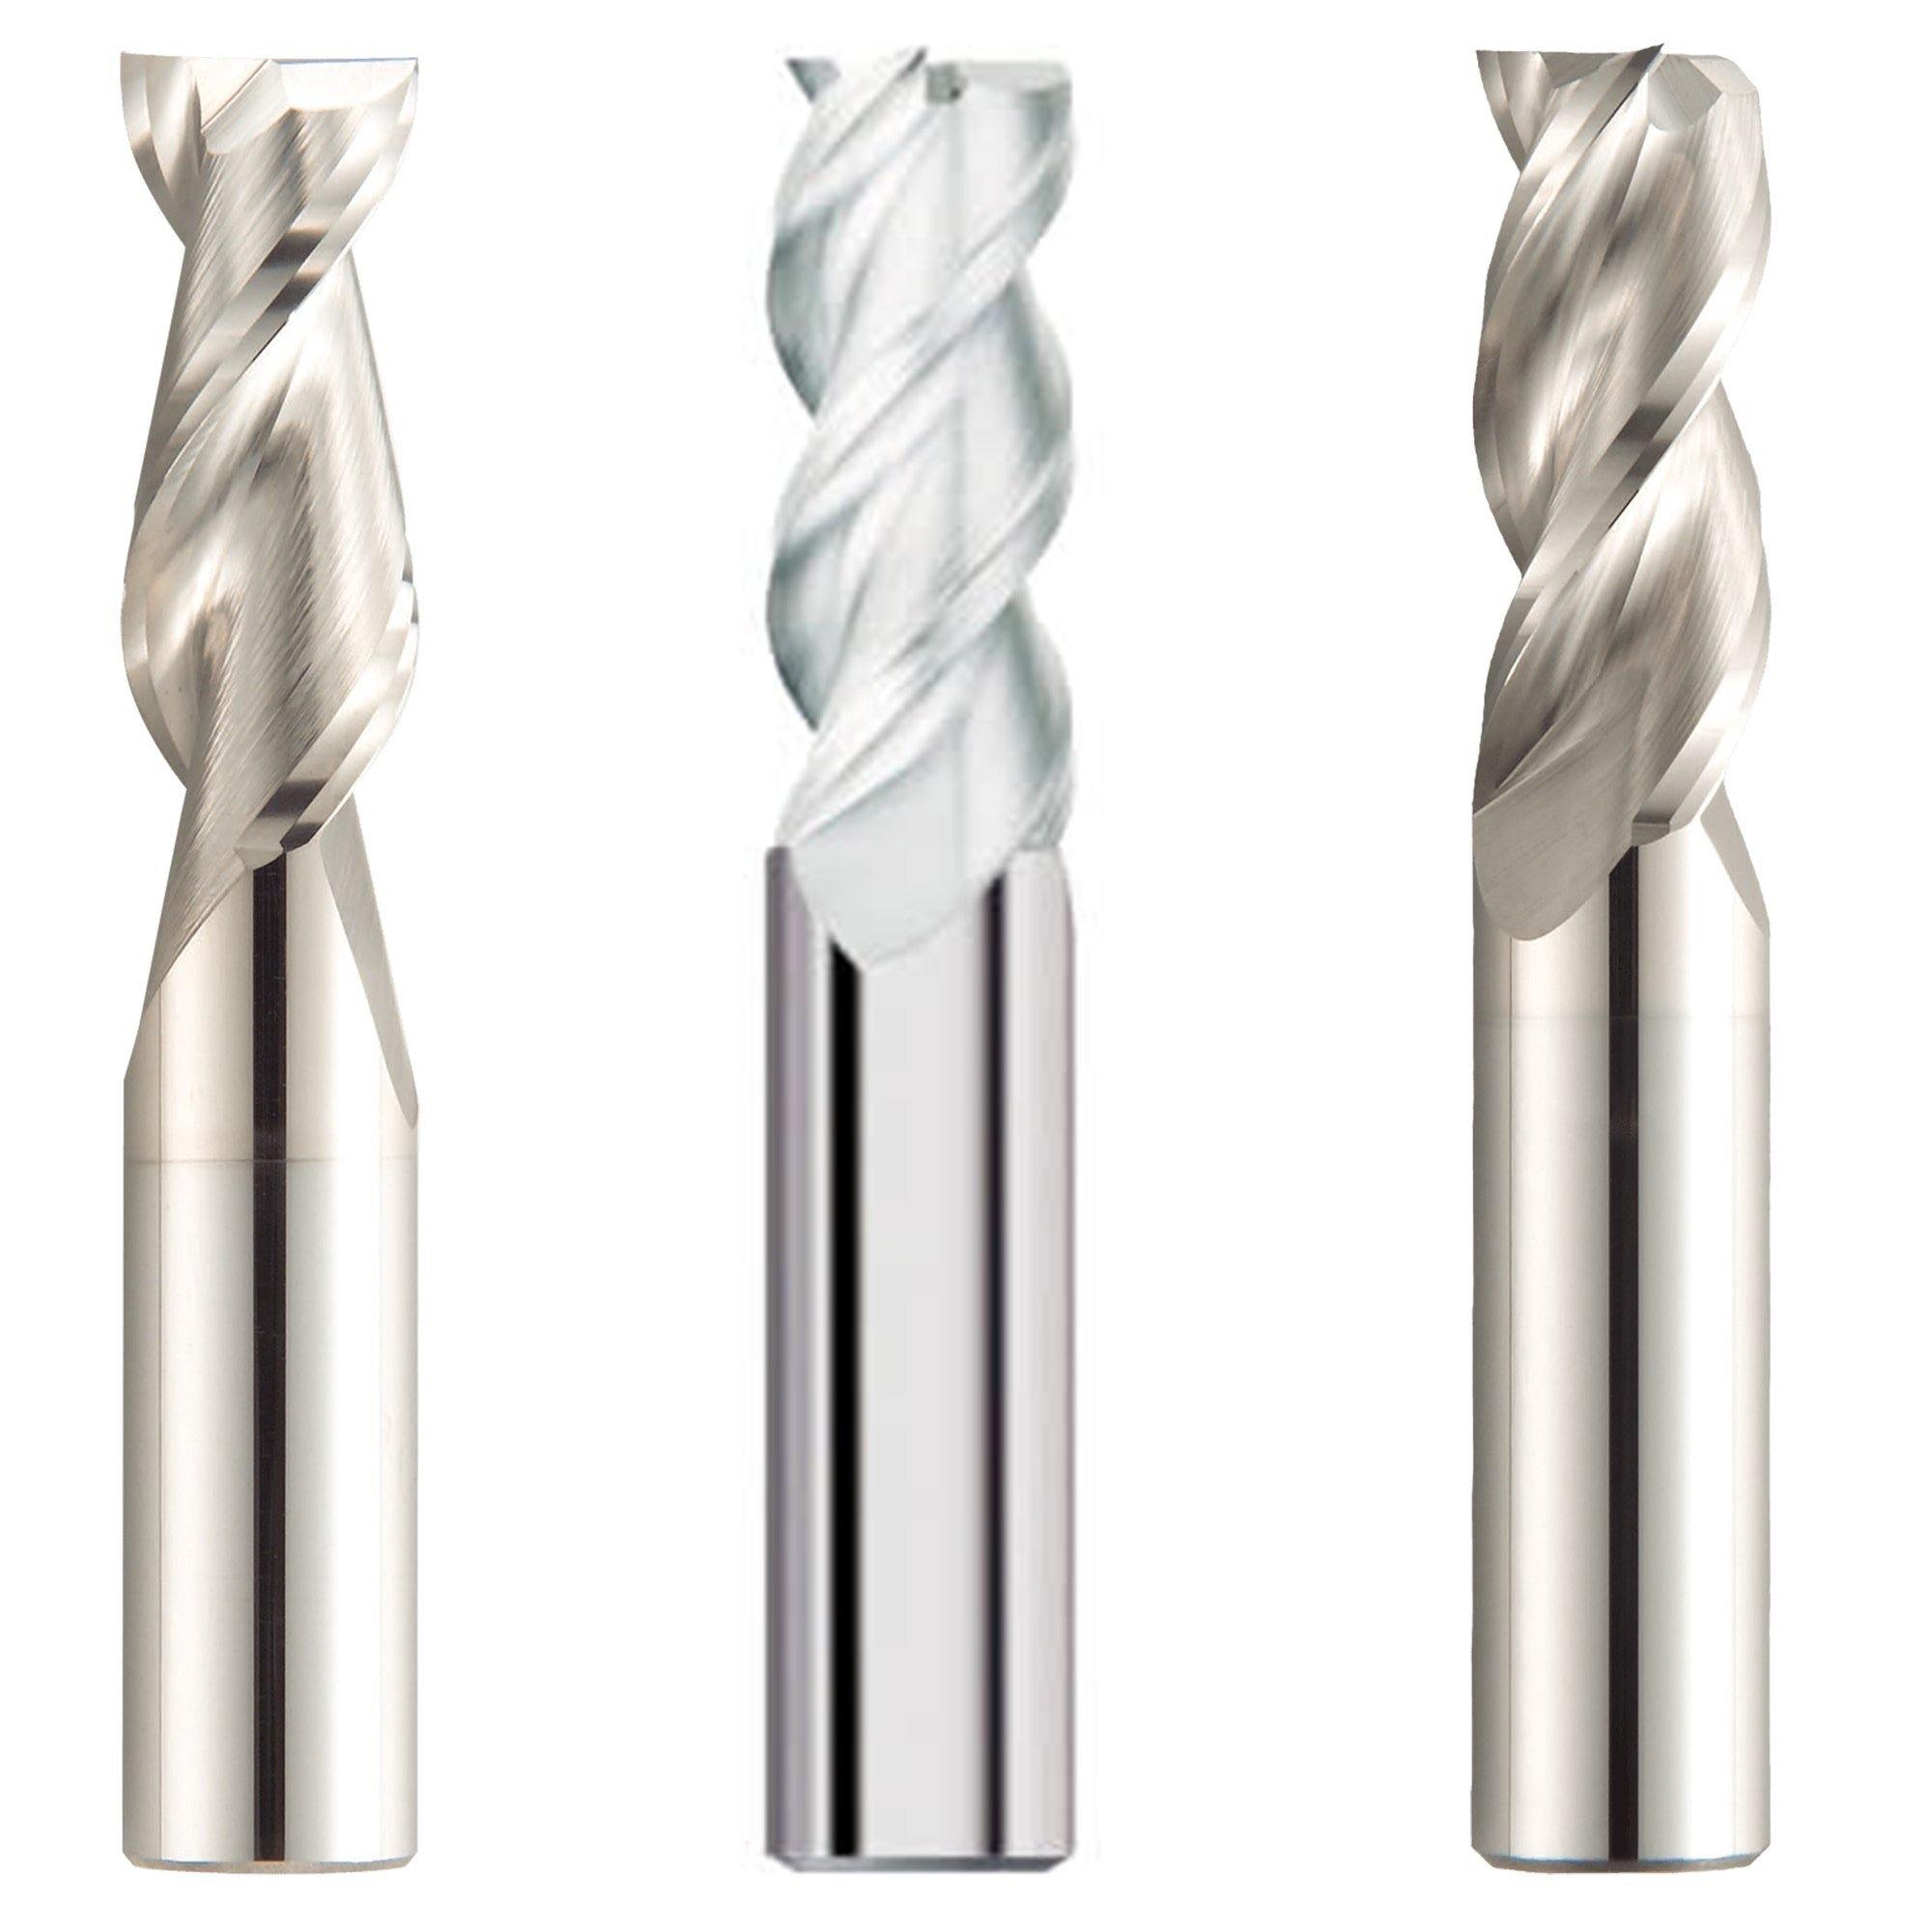 (3 Pack) 3/4" x 2-1/4" x 5" Aluminum HP Carbide End Mills - The End Mill Store 